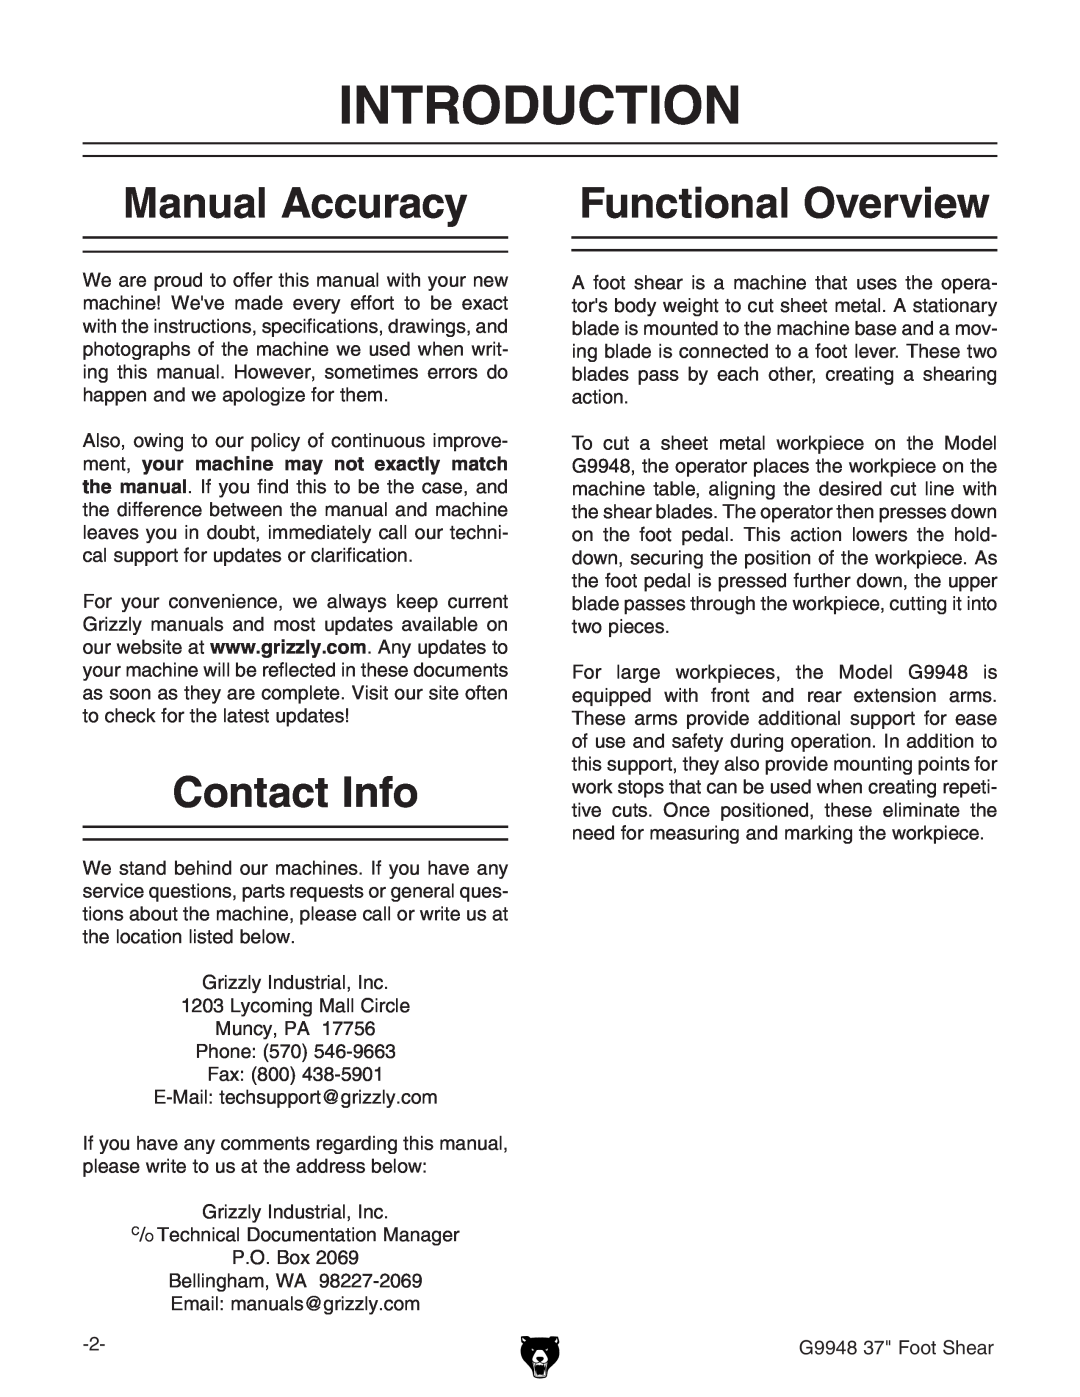 Grizzly G9948 owner manual Introduction, Manual Accuracy, Functional Overview, Contact Info, ,ddiHZVg 